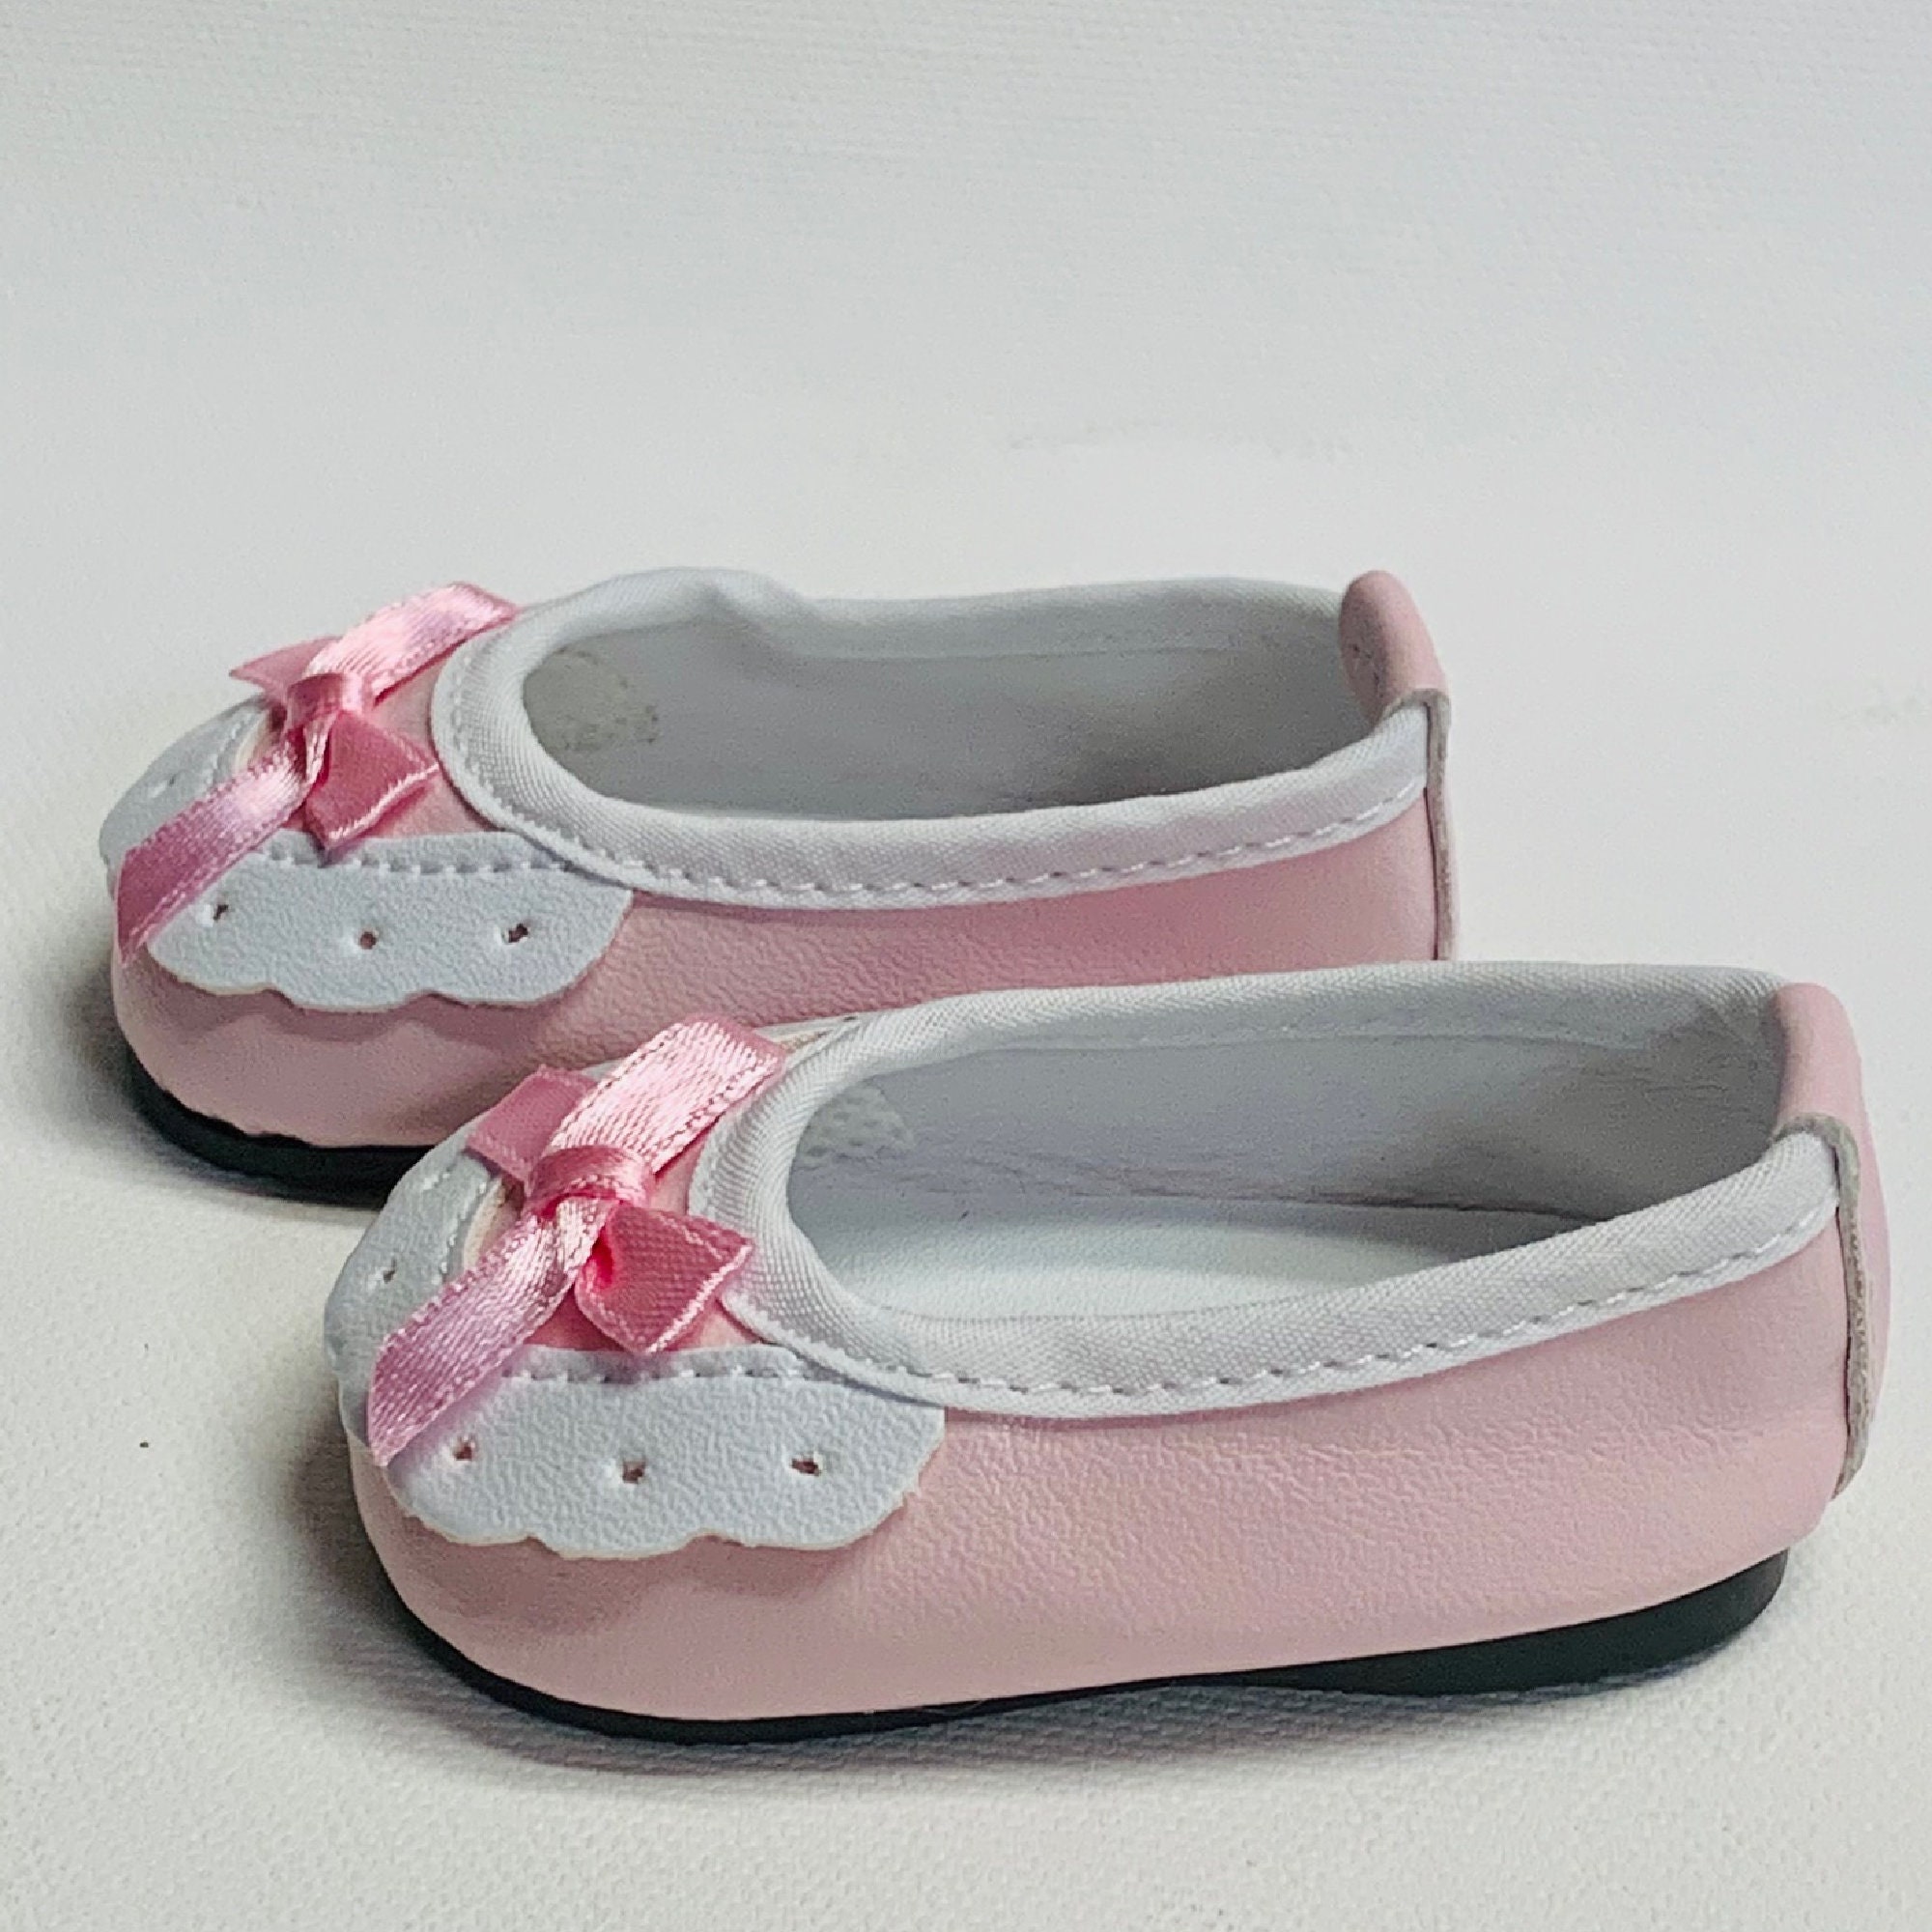 White and Pink Bow Shoes for 18 Inch Dolls Shoes for American | Etsy